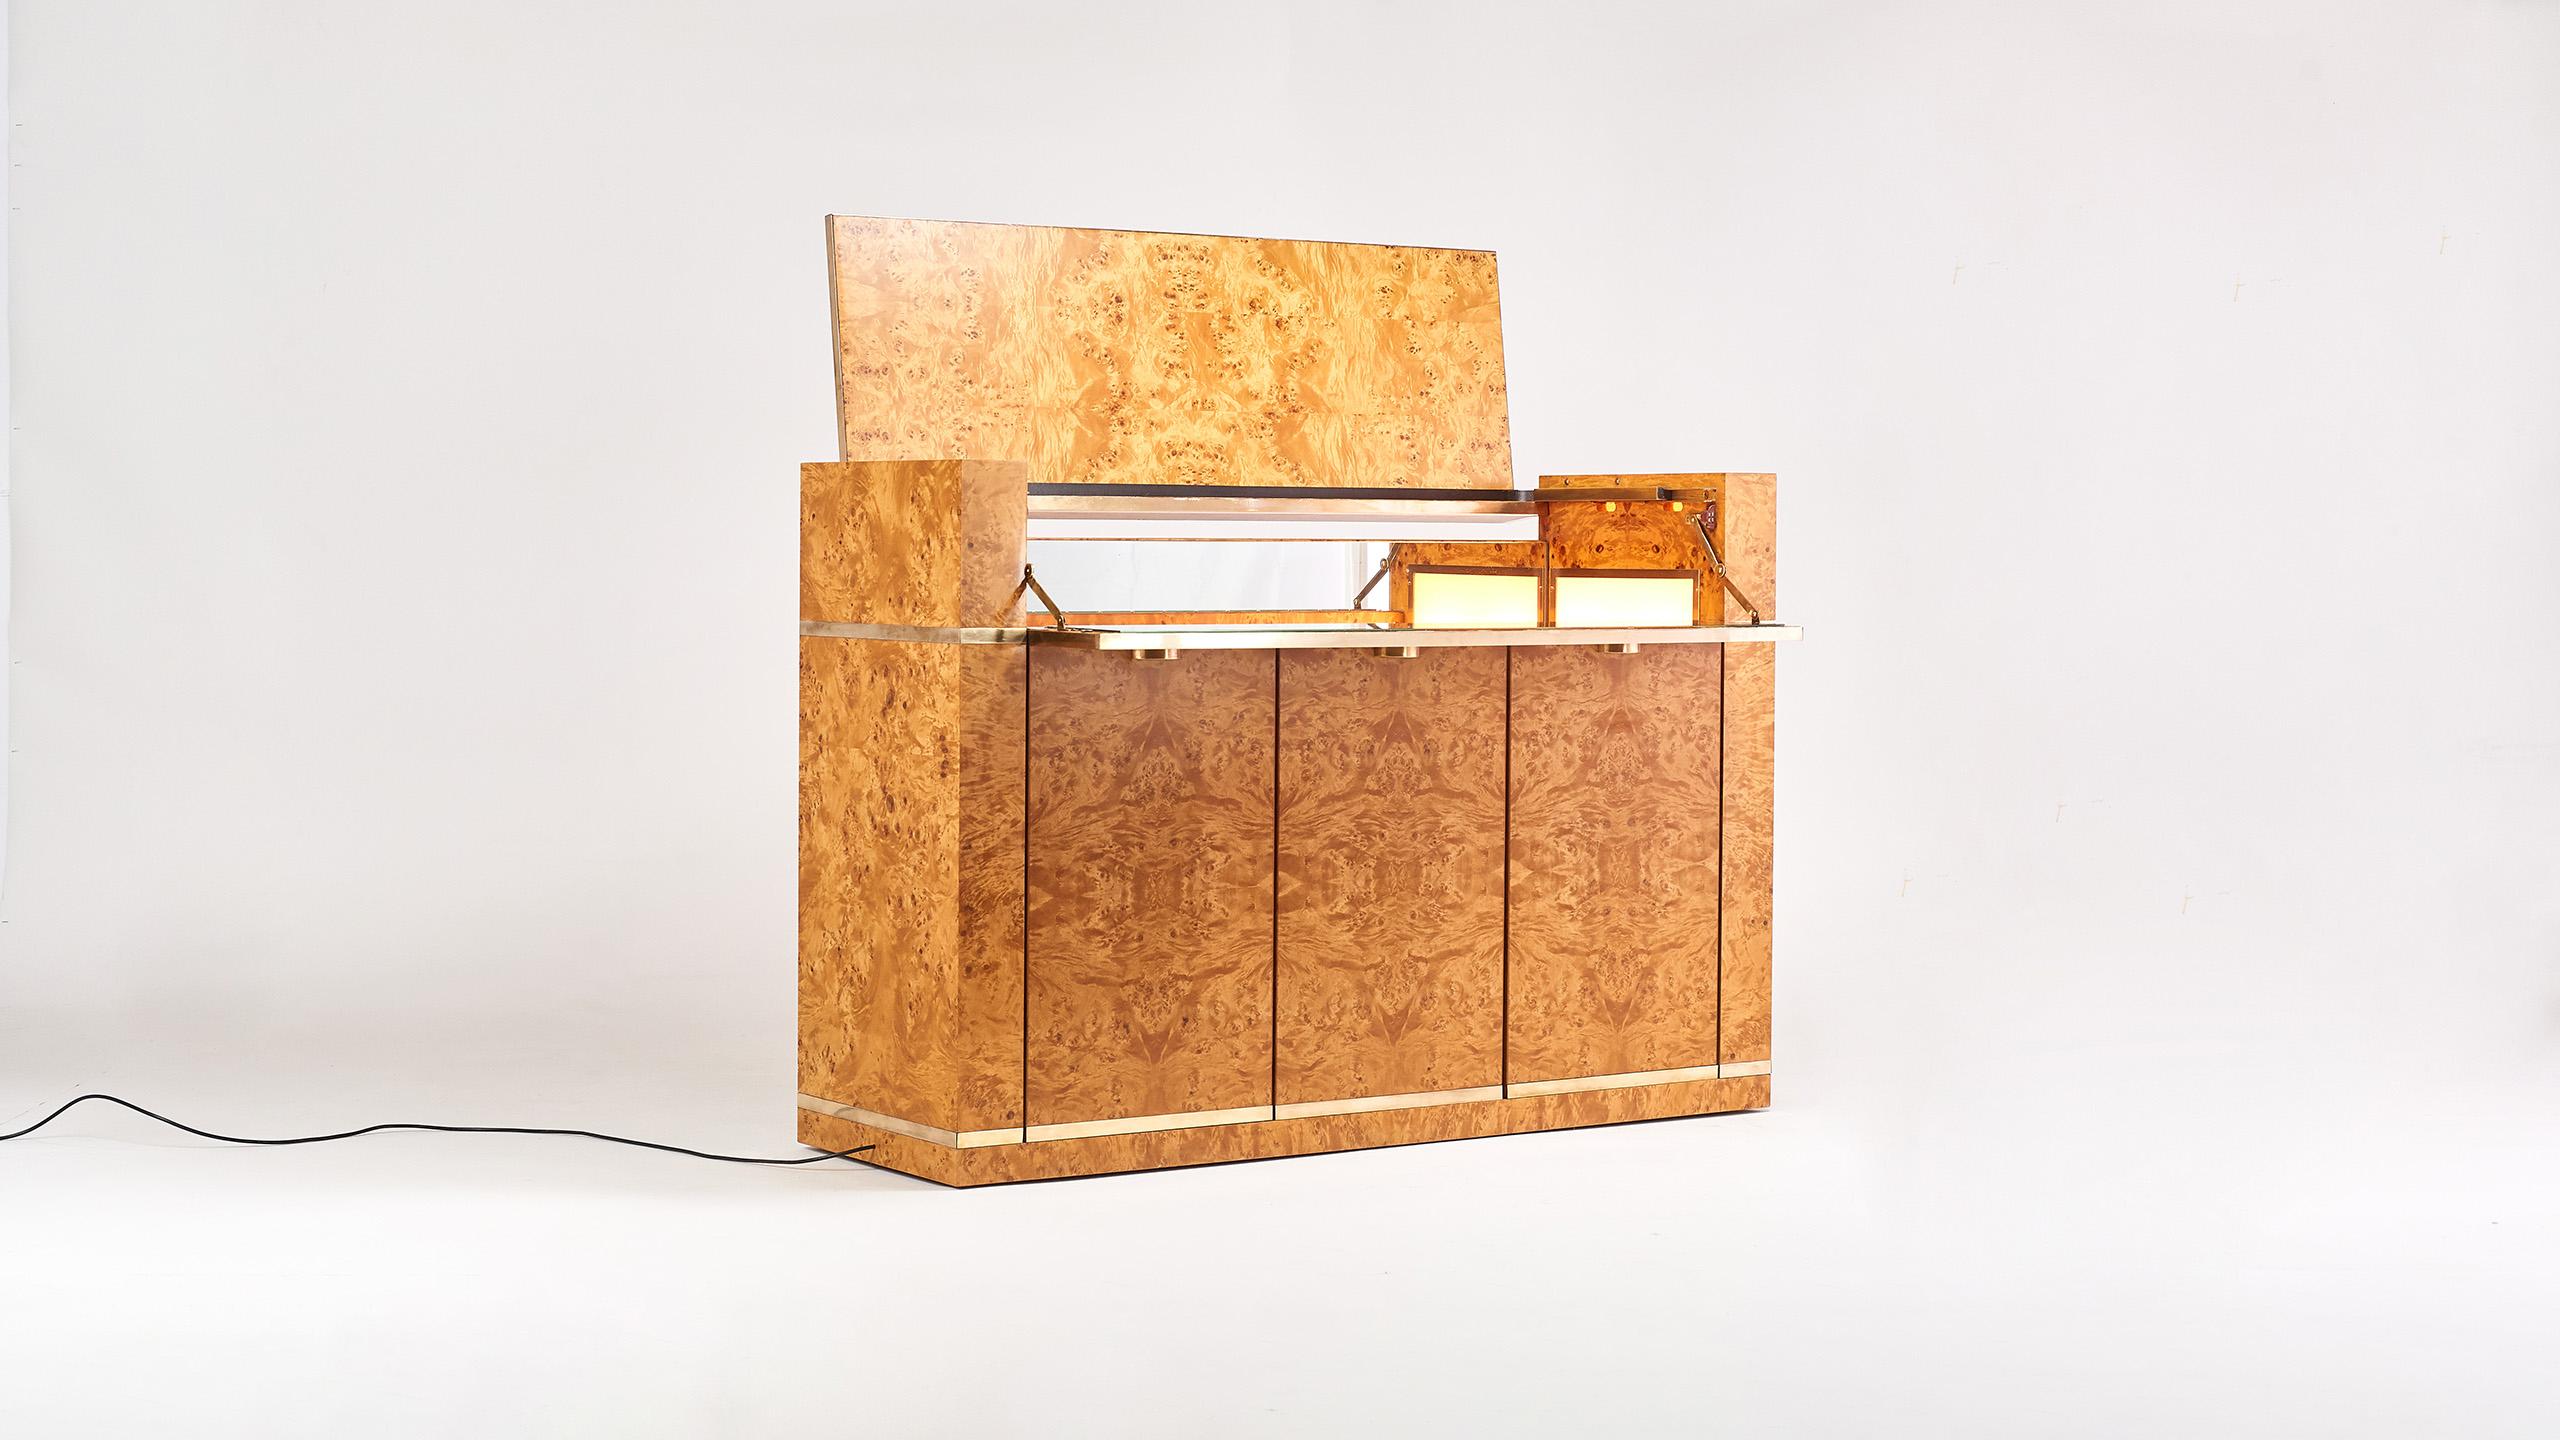 Exceptional dry bar in burl wood enhanced with brass, by designer Jean-Claude Mahey for Roche Bobois.

Opening by 3 doors on the front revealing shelf, and two flaps opening on a backlit bar on the upper part. 

Small traces of use, very good